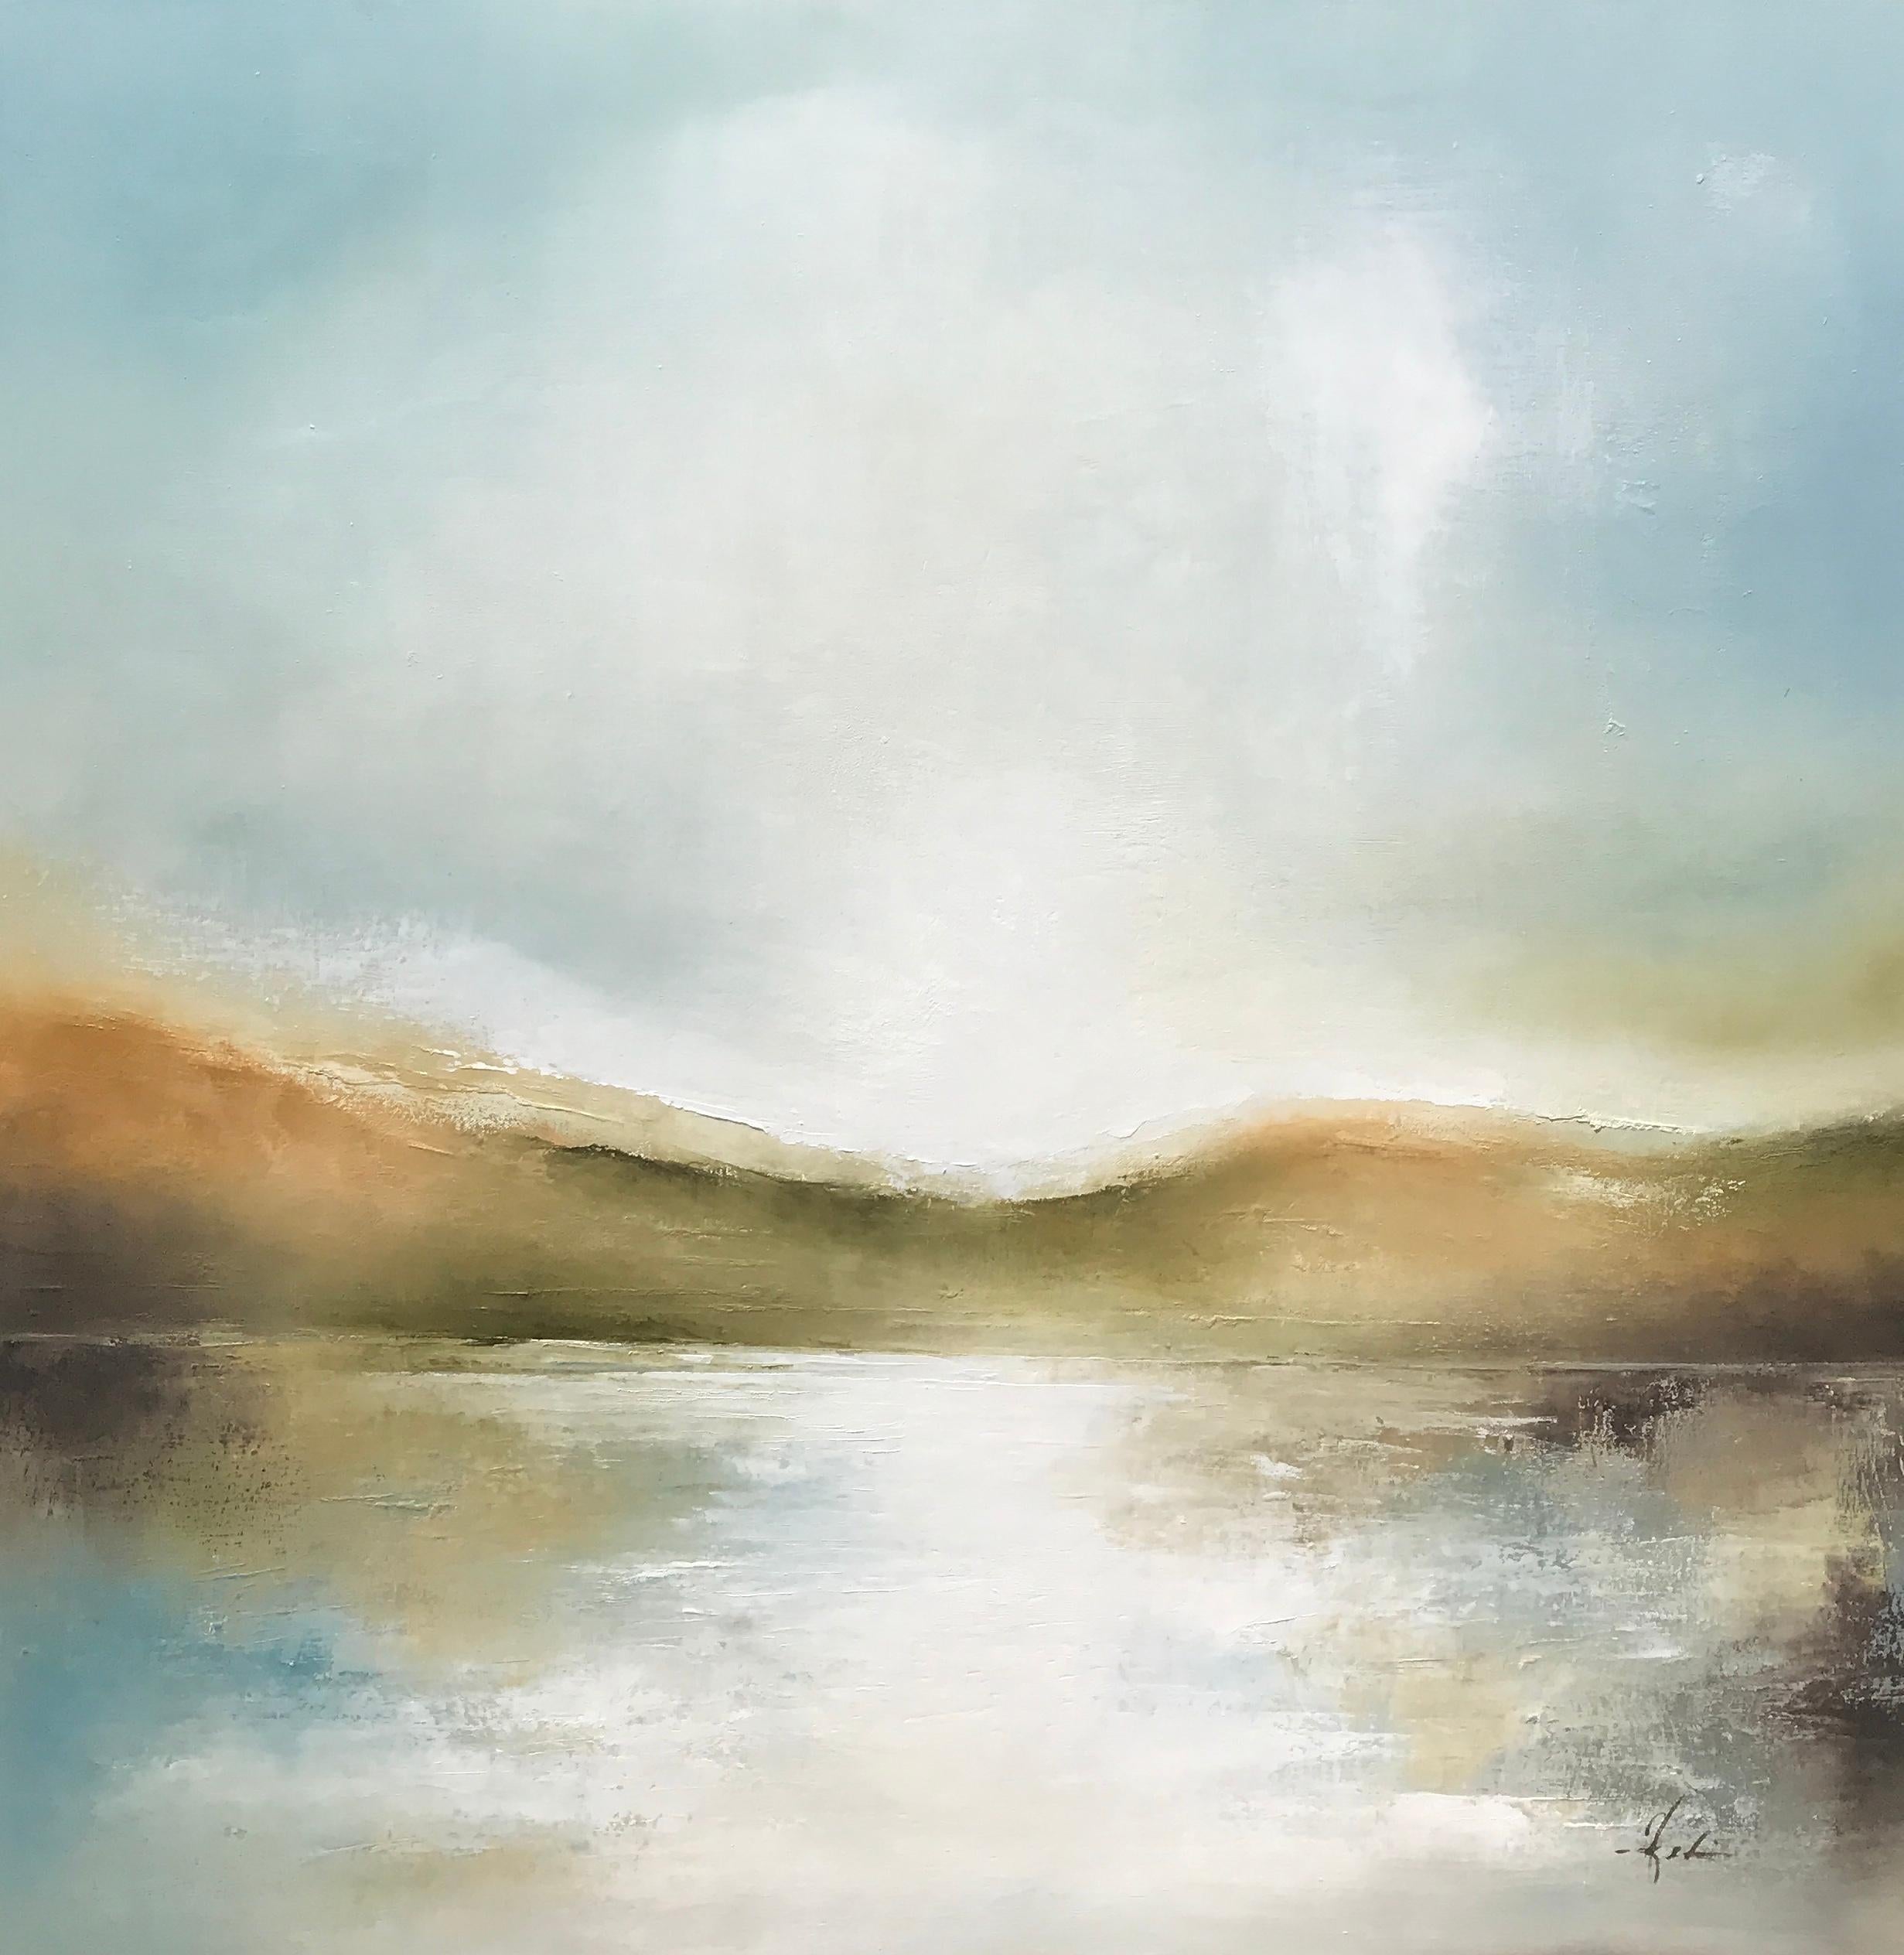 'Drifting in the Cove II' is a framed oil on canvas landscape painting created by America artist Heidi Kirschner in 2018. Featuring a soft palette mostly made of a variation of pale blue, brown and green tones accented with subtle touches of white,